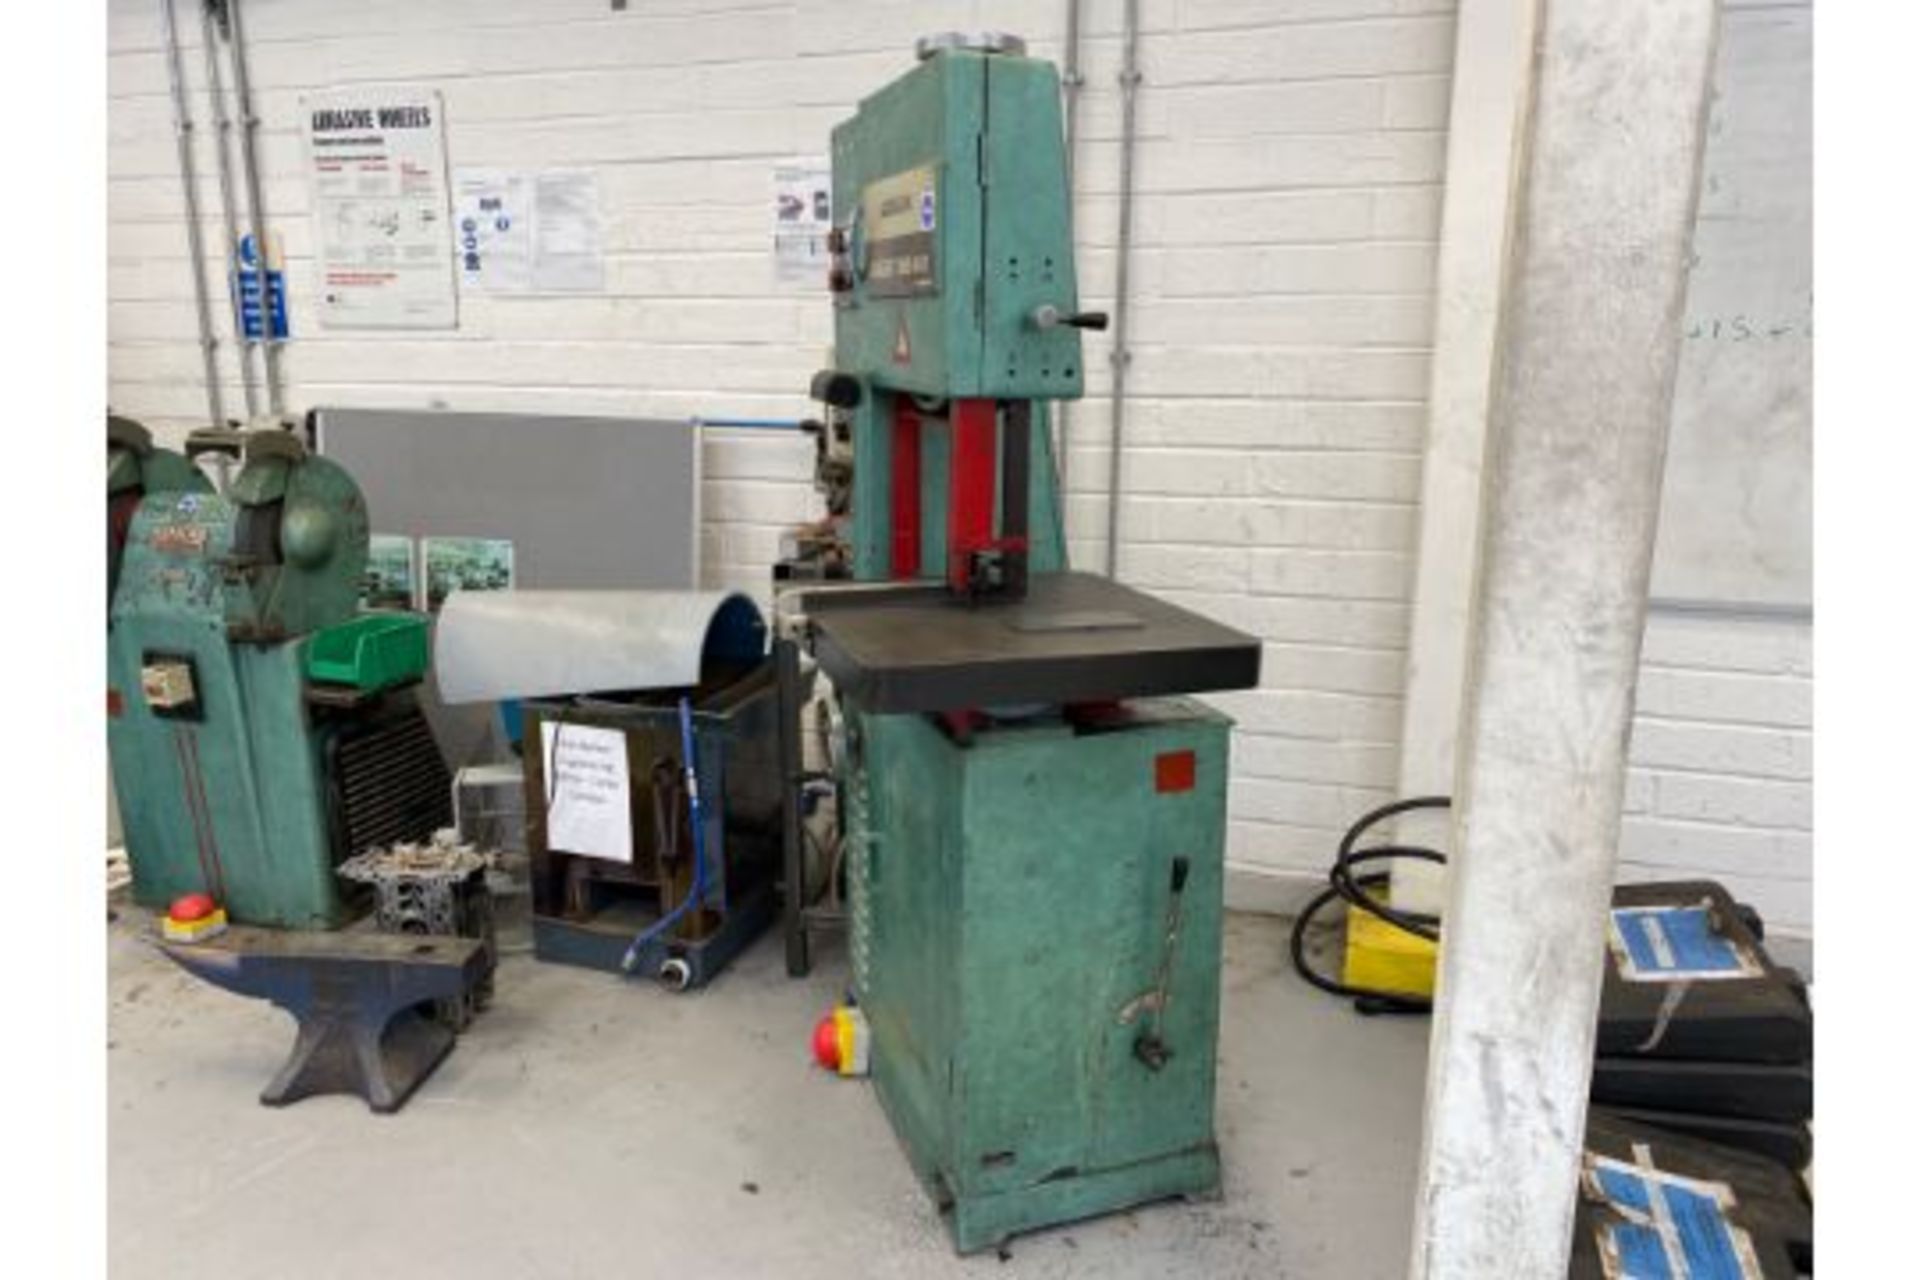 Addison Jubilee VBS 400 Vertical Variable Speed Bandsaw with Stationary Table - Image 3 of 10